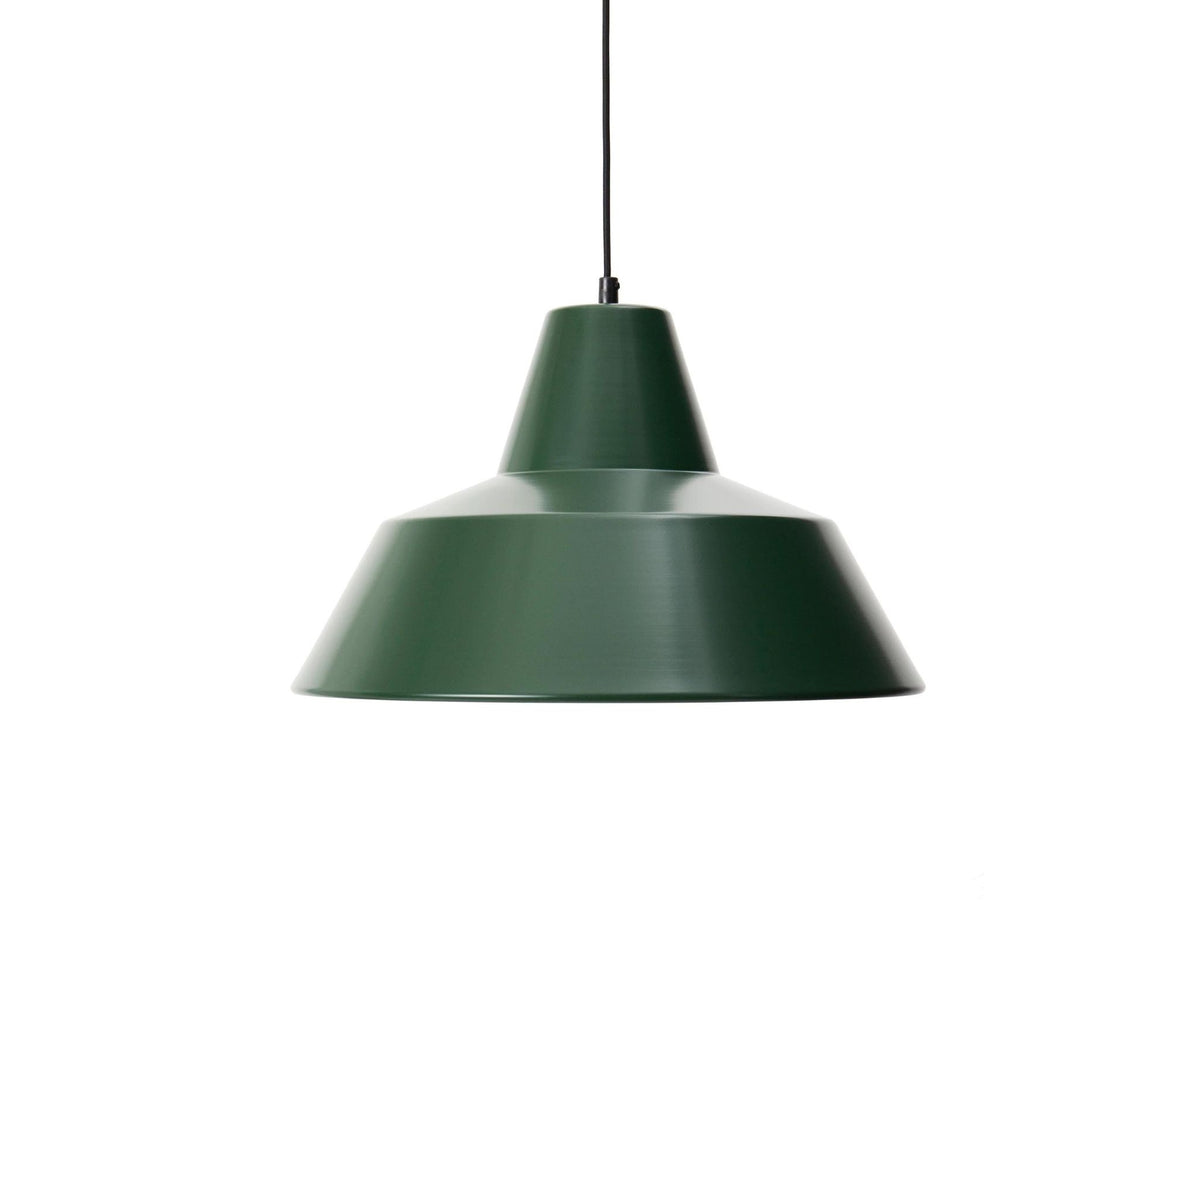 Made by Hand Workshop W4 Pendant in Racing Green by A Wedel Madsen